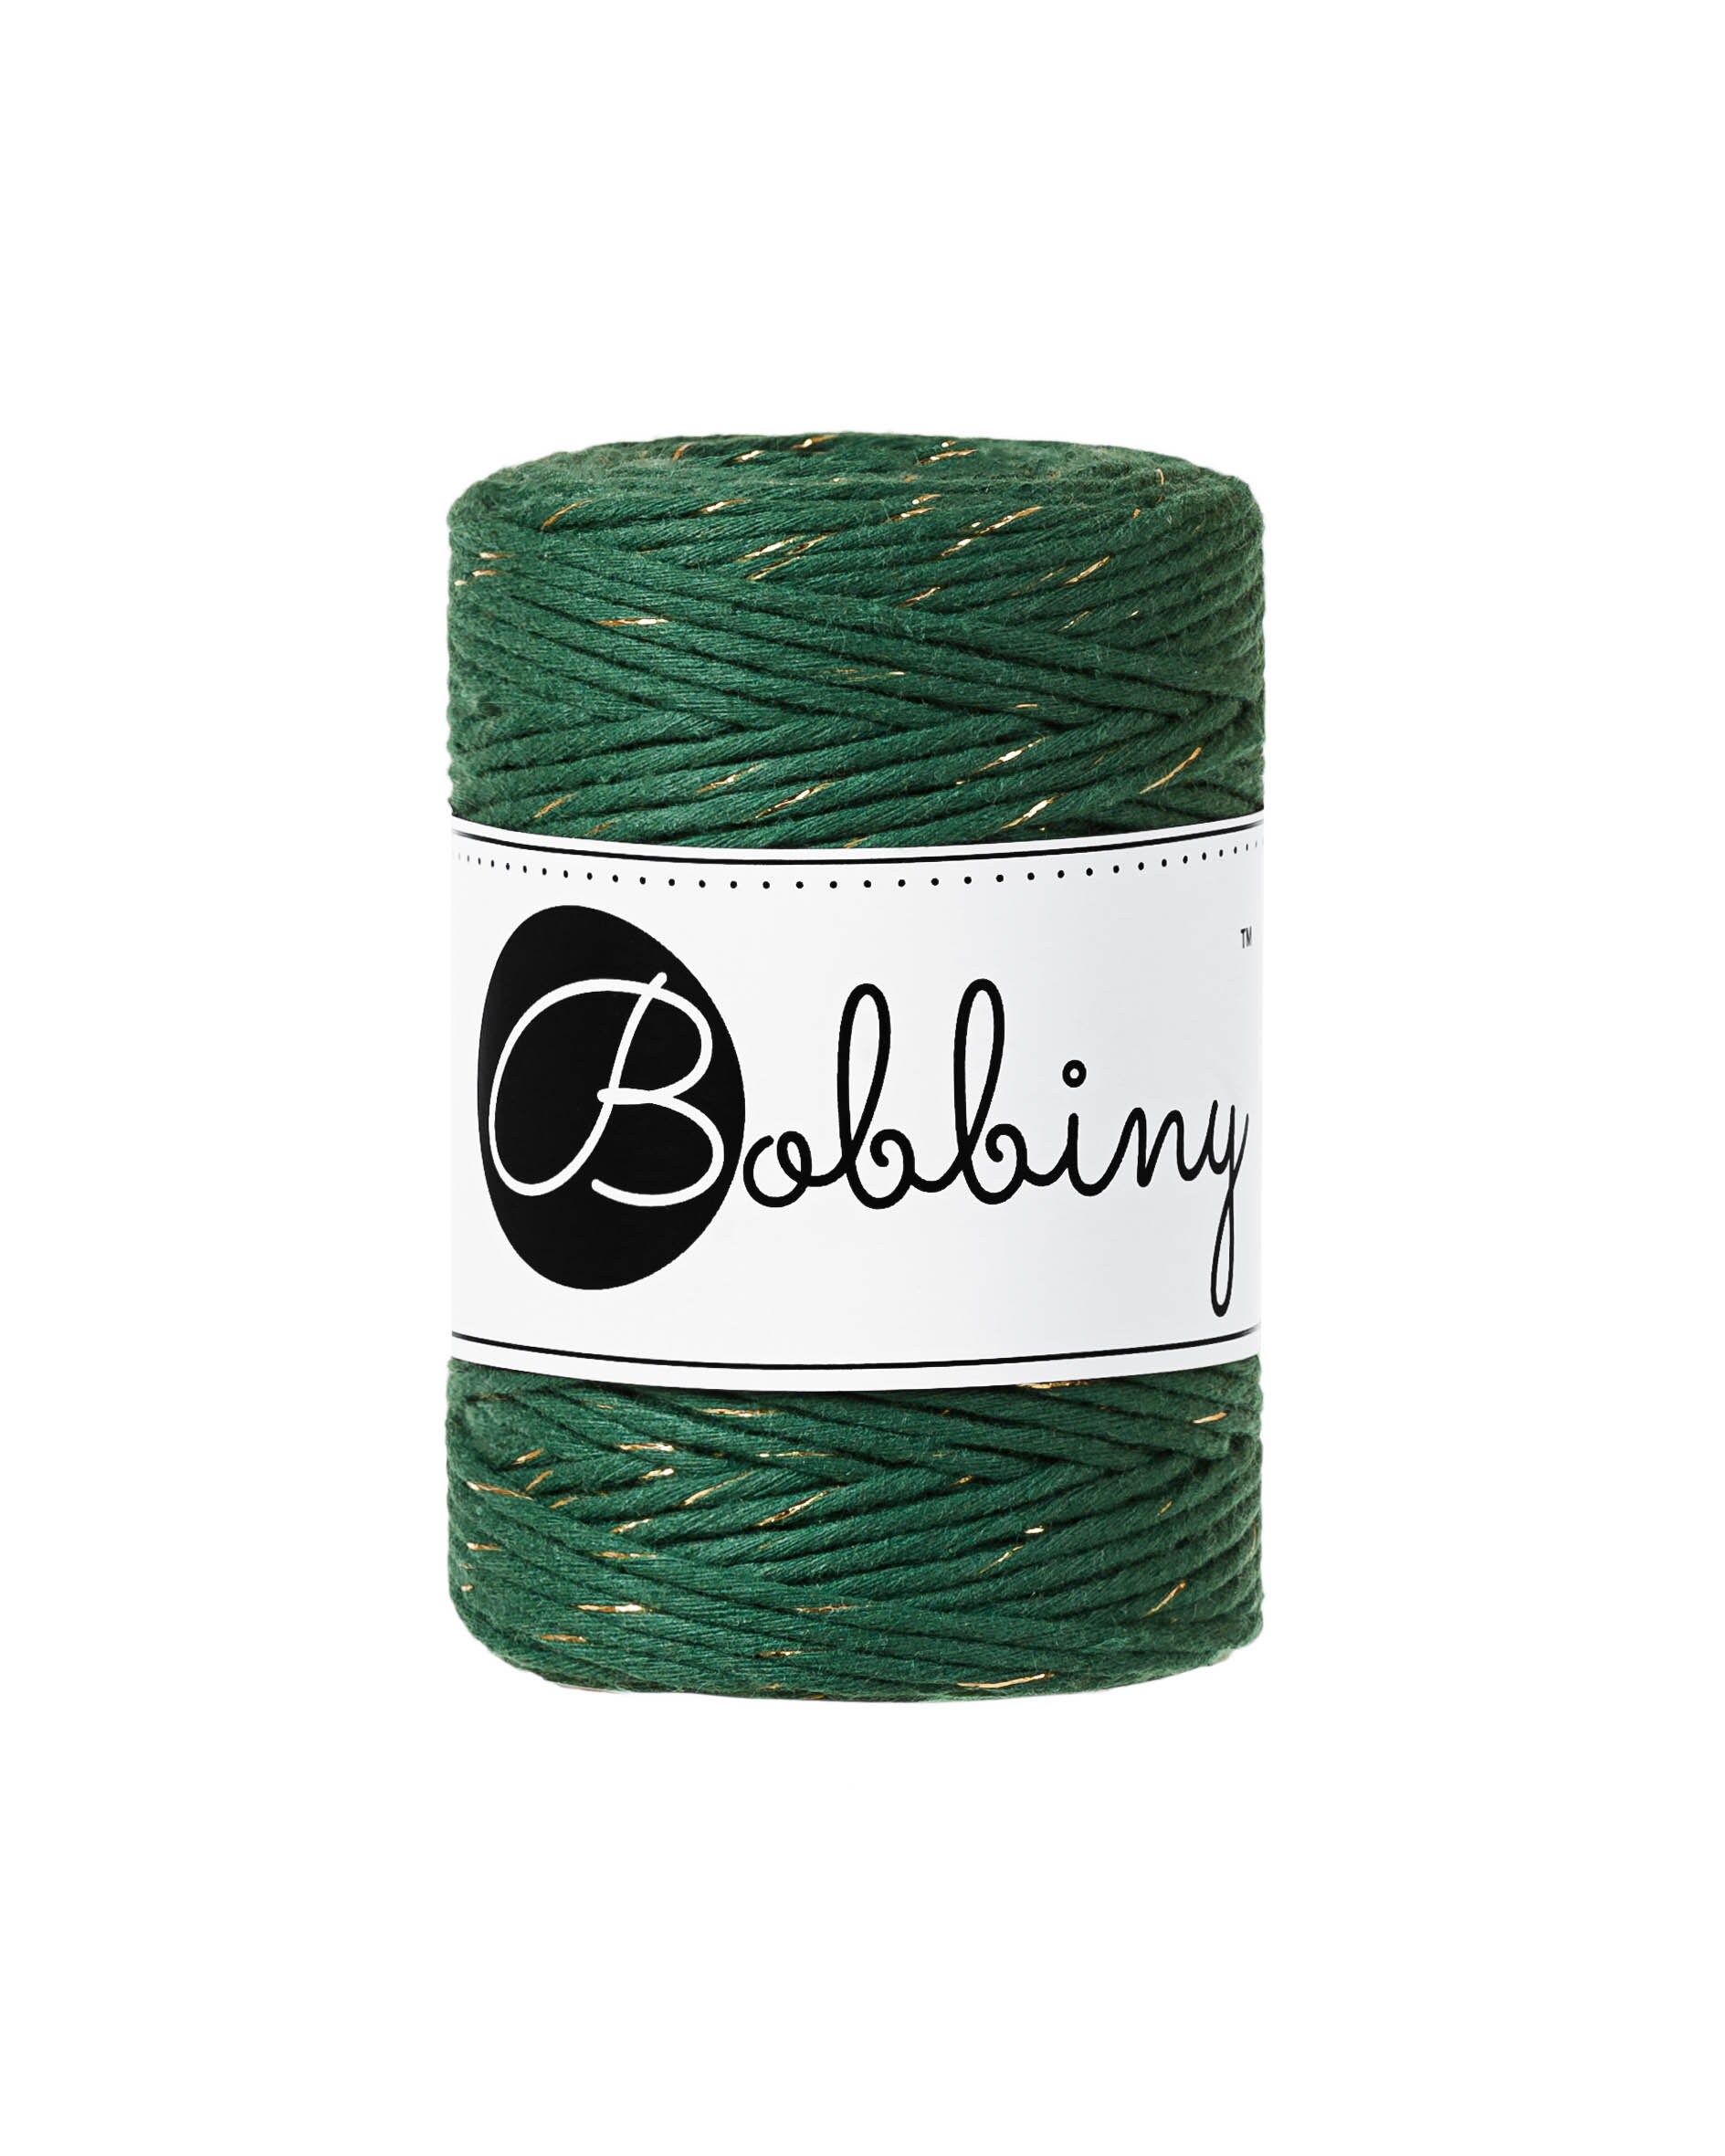 Cotton Twine, Cotton String, Bakers Twine, All Natural Cotton